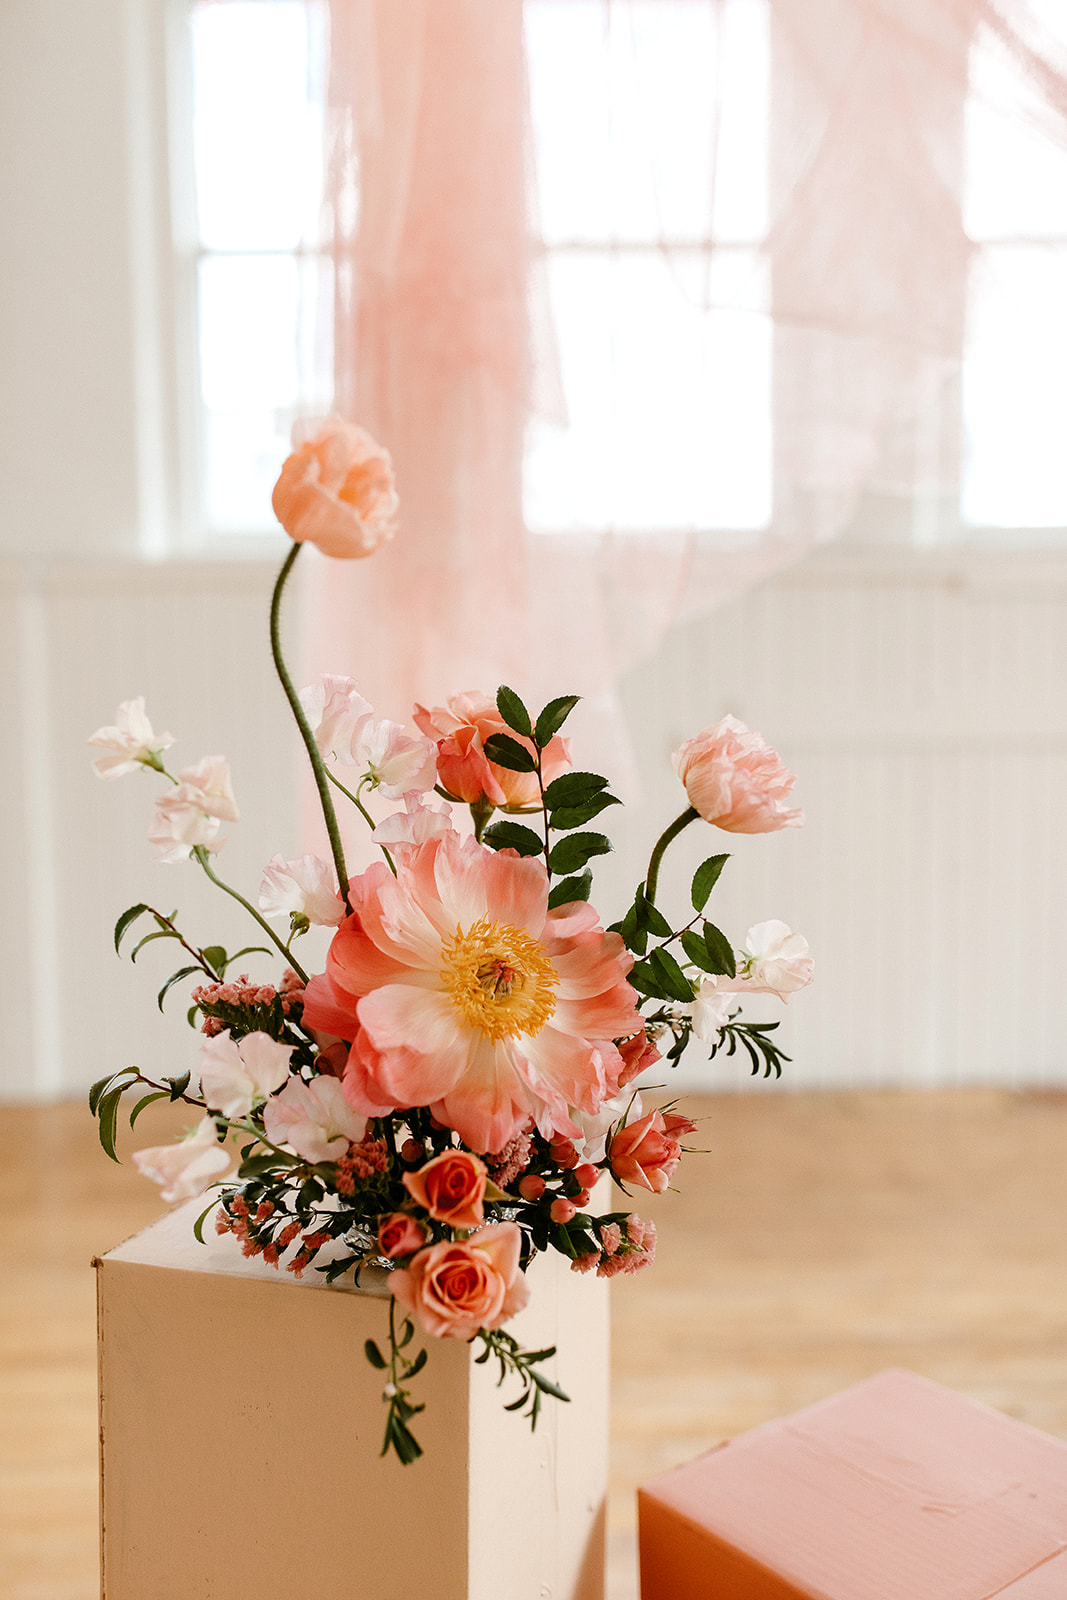 Citrus floral inspiration for a unique diy ceremony with painted cardboard boxes